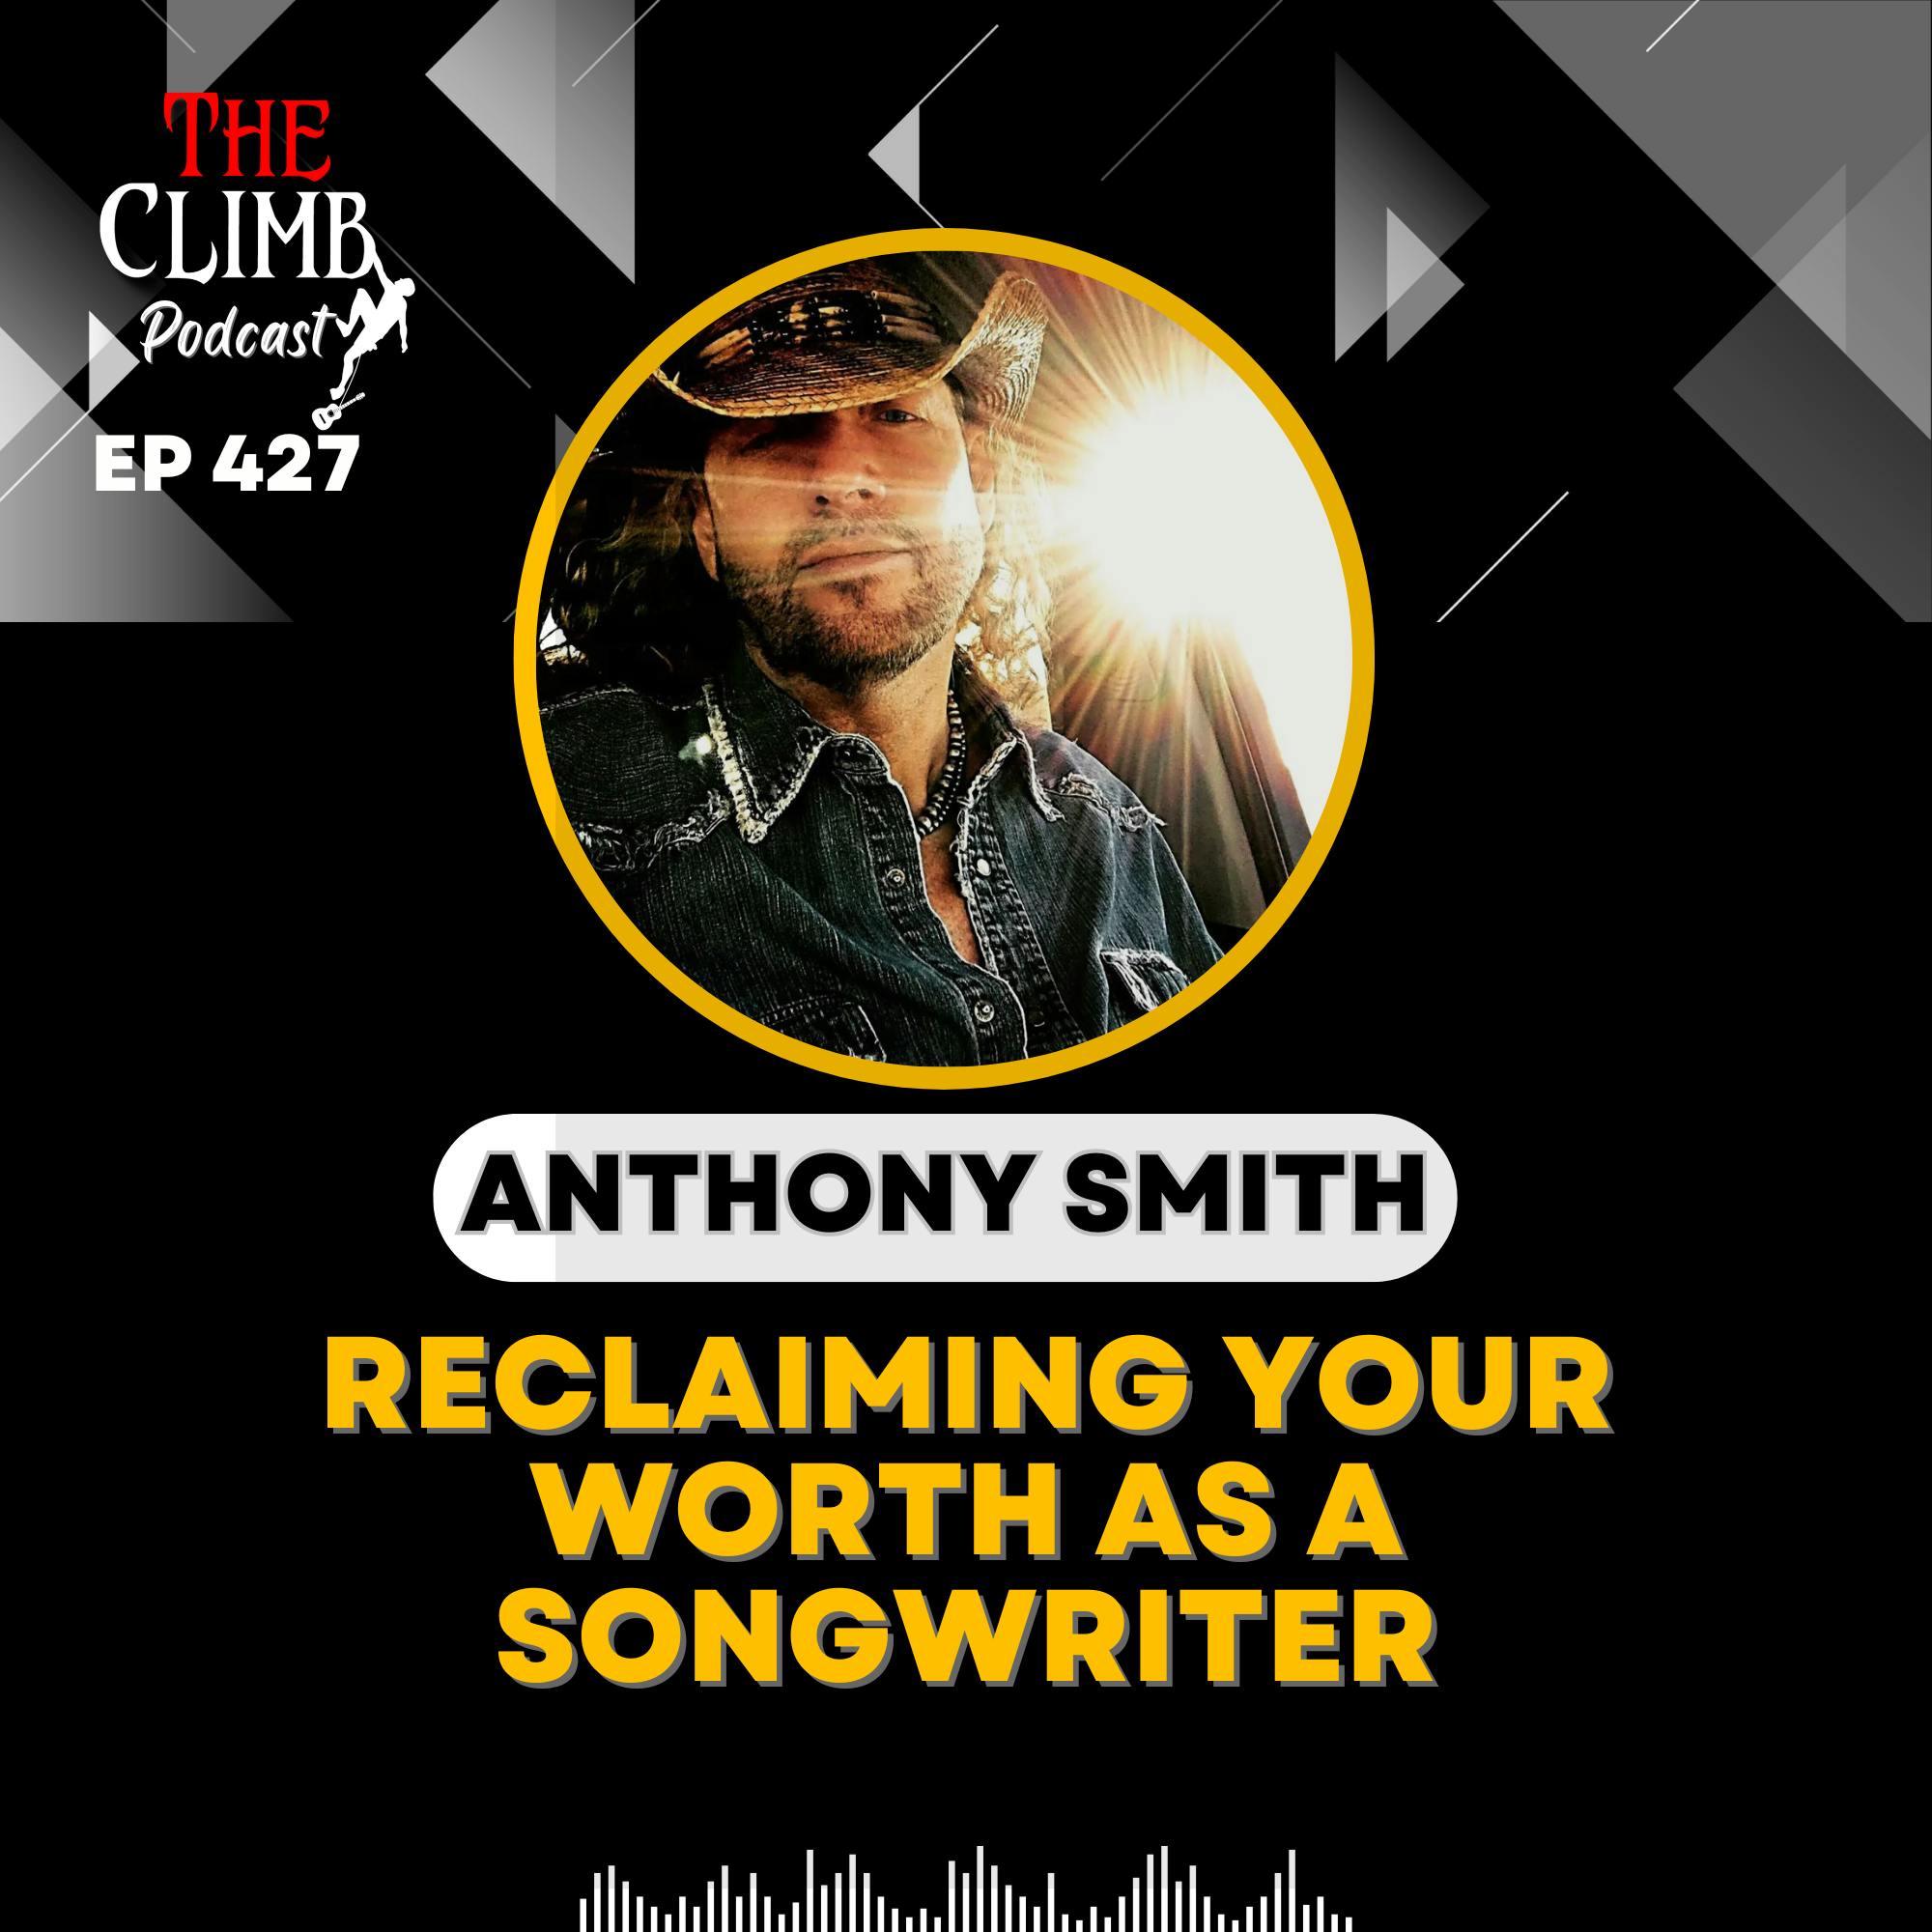 Ep 427: Interview with Anthony Smith - Fight For The Songwriters